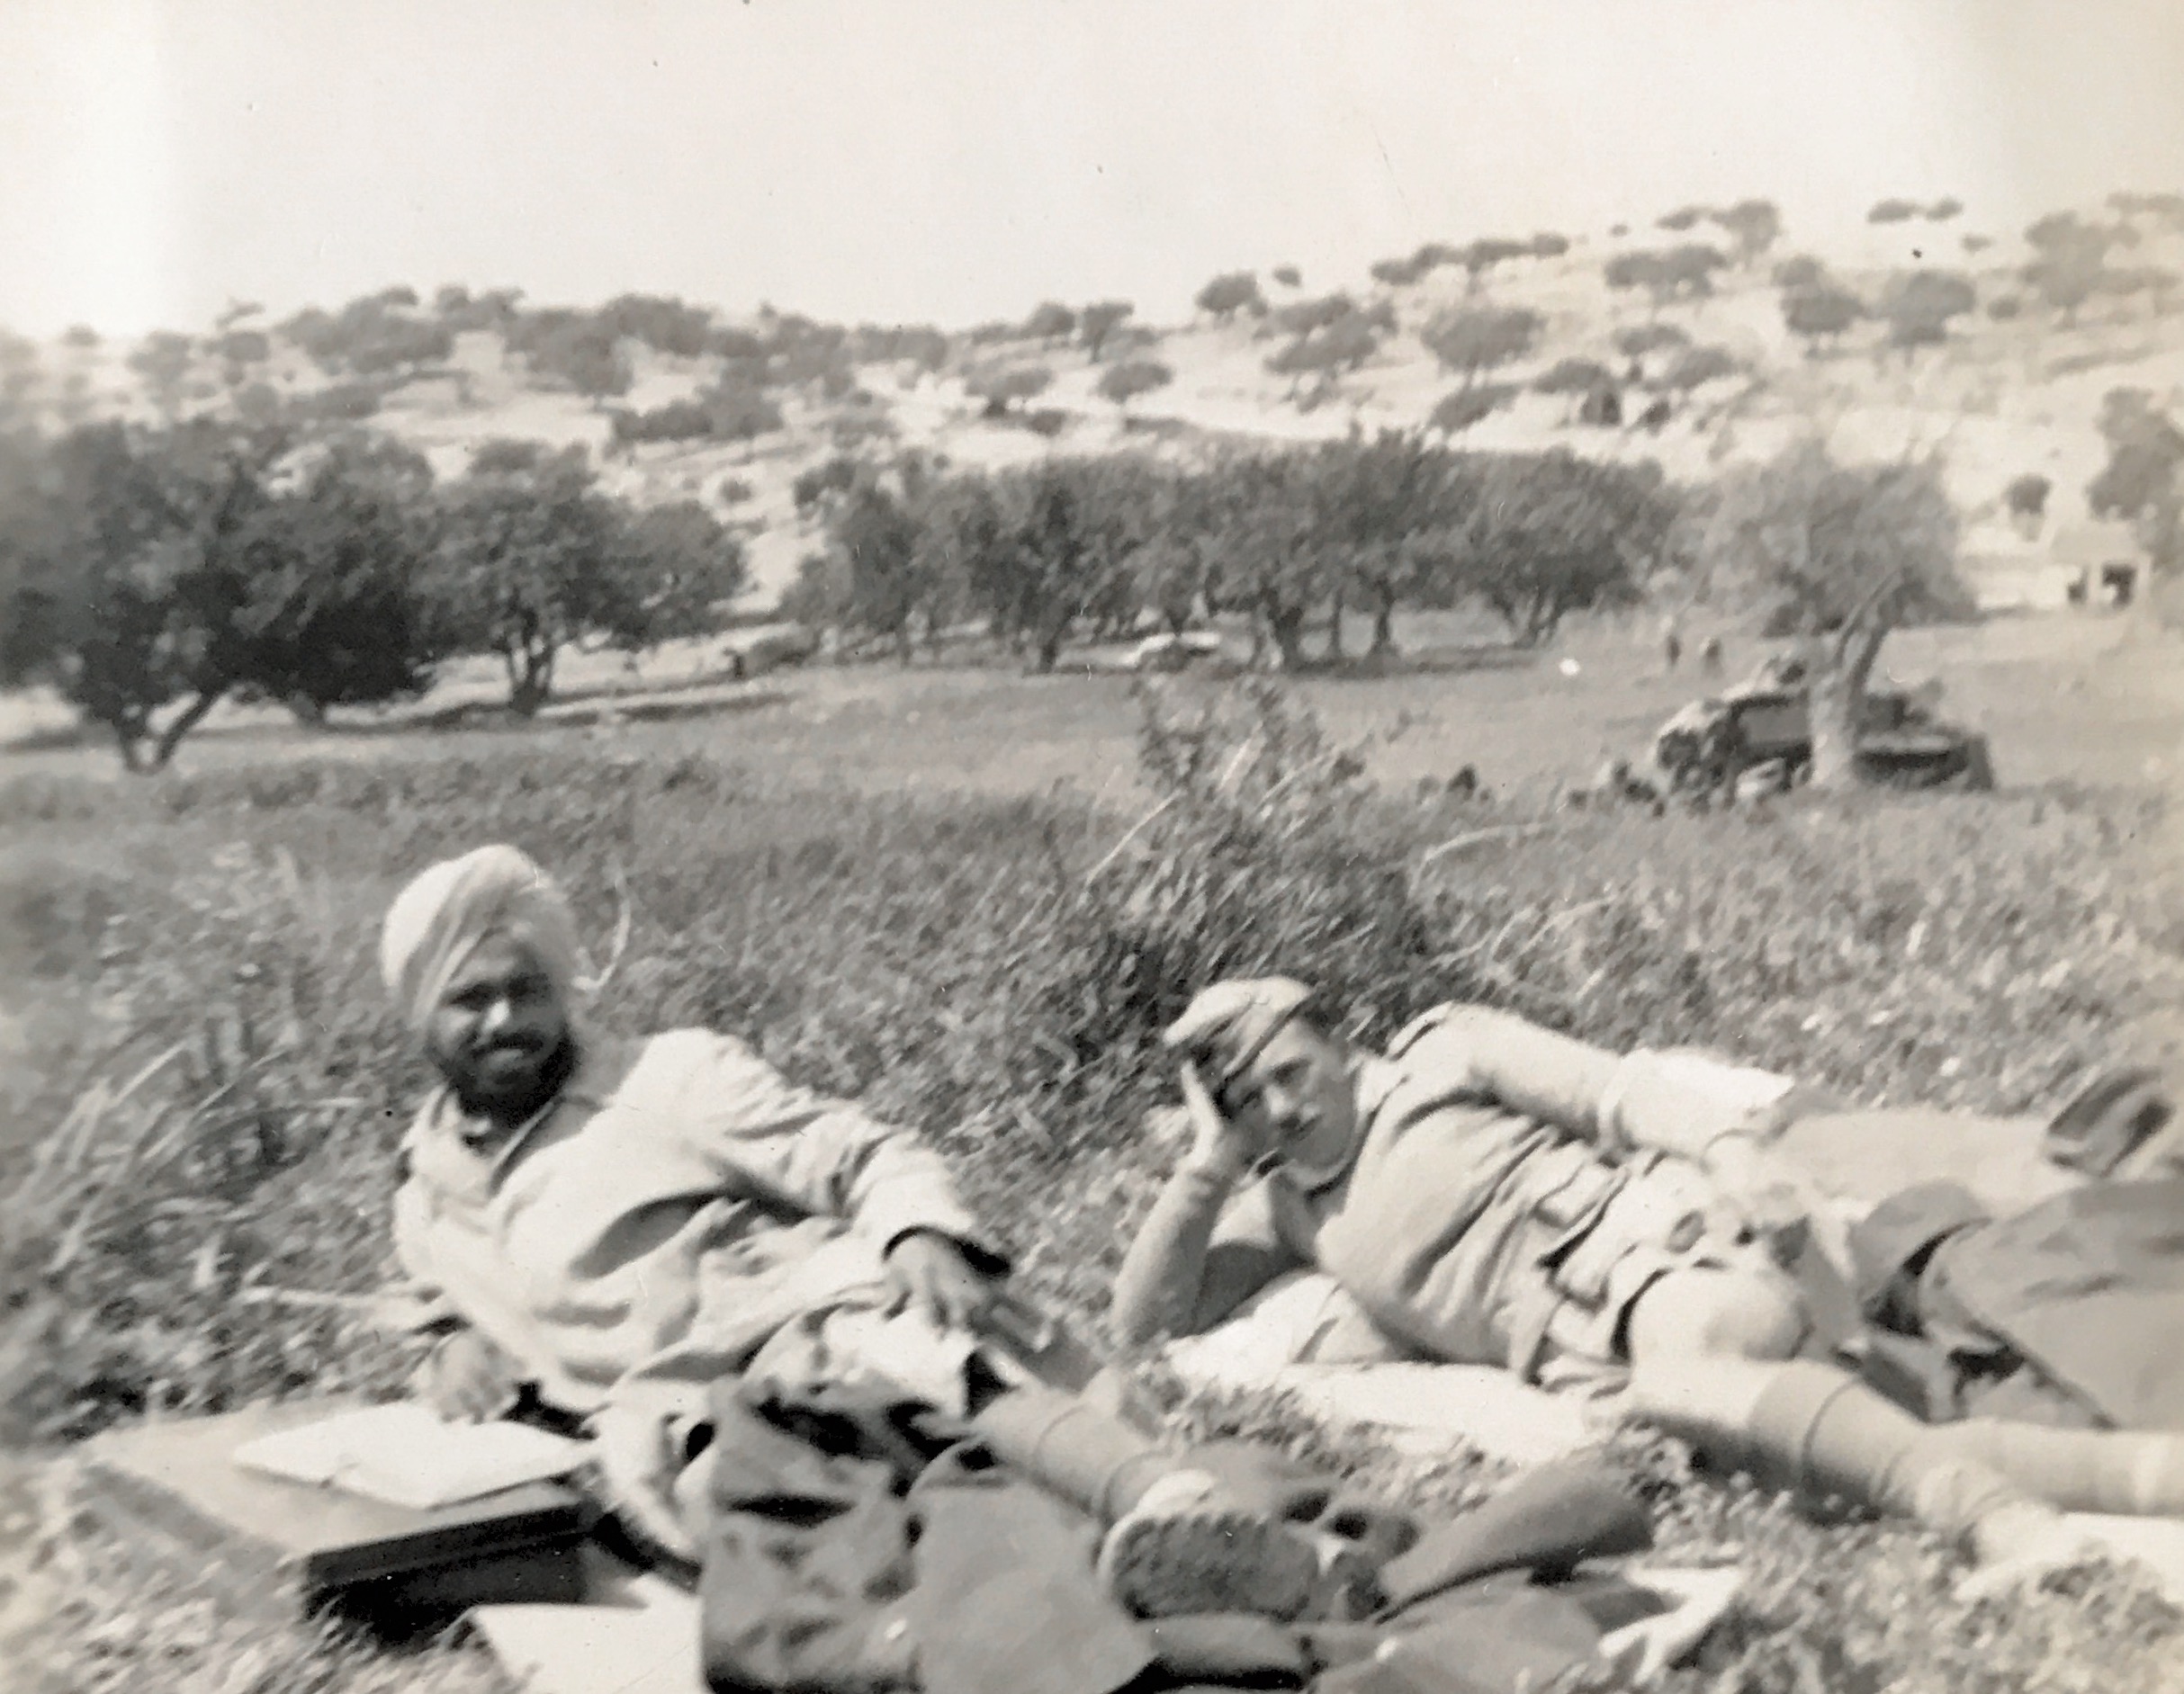 Self and Lieutenant King during 10 Infantry Division exercise in Cyprus in February 1943 with 2 Royal Battalion The Sikh Regt. Lieutenant King was unfortunately later killed in Italy in 1944.￼